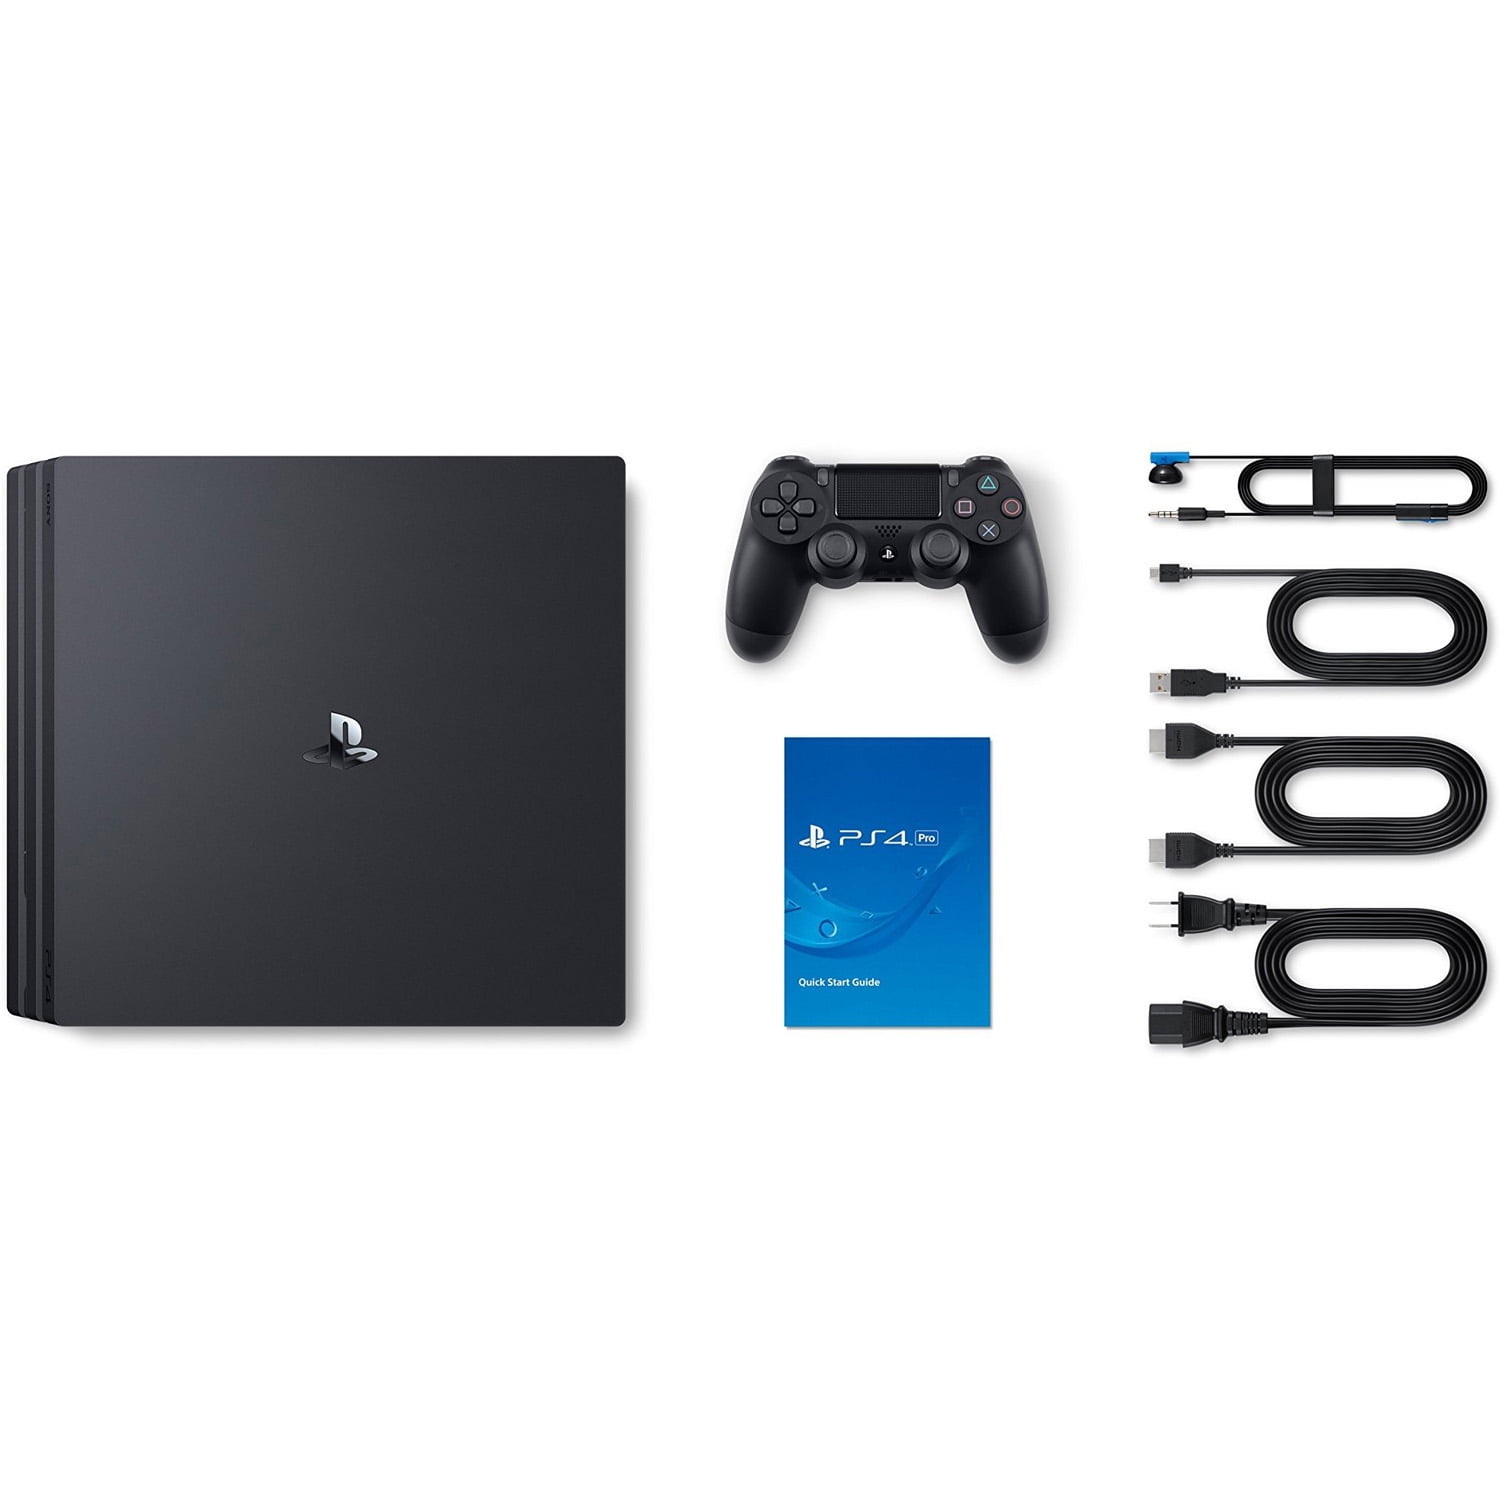 Minecraft Game, PS4 Console and Crystal Controller Bundle, Sony